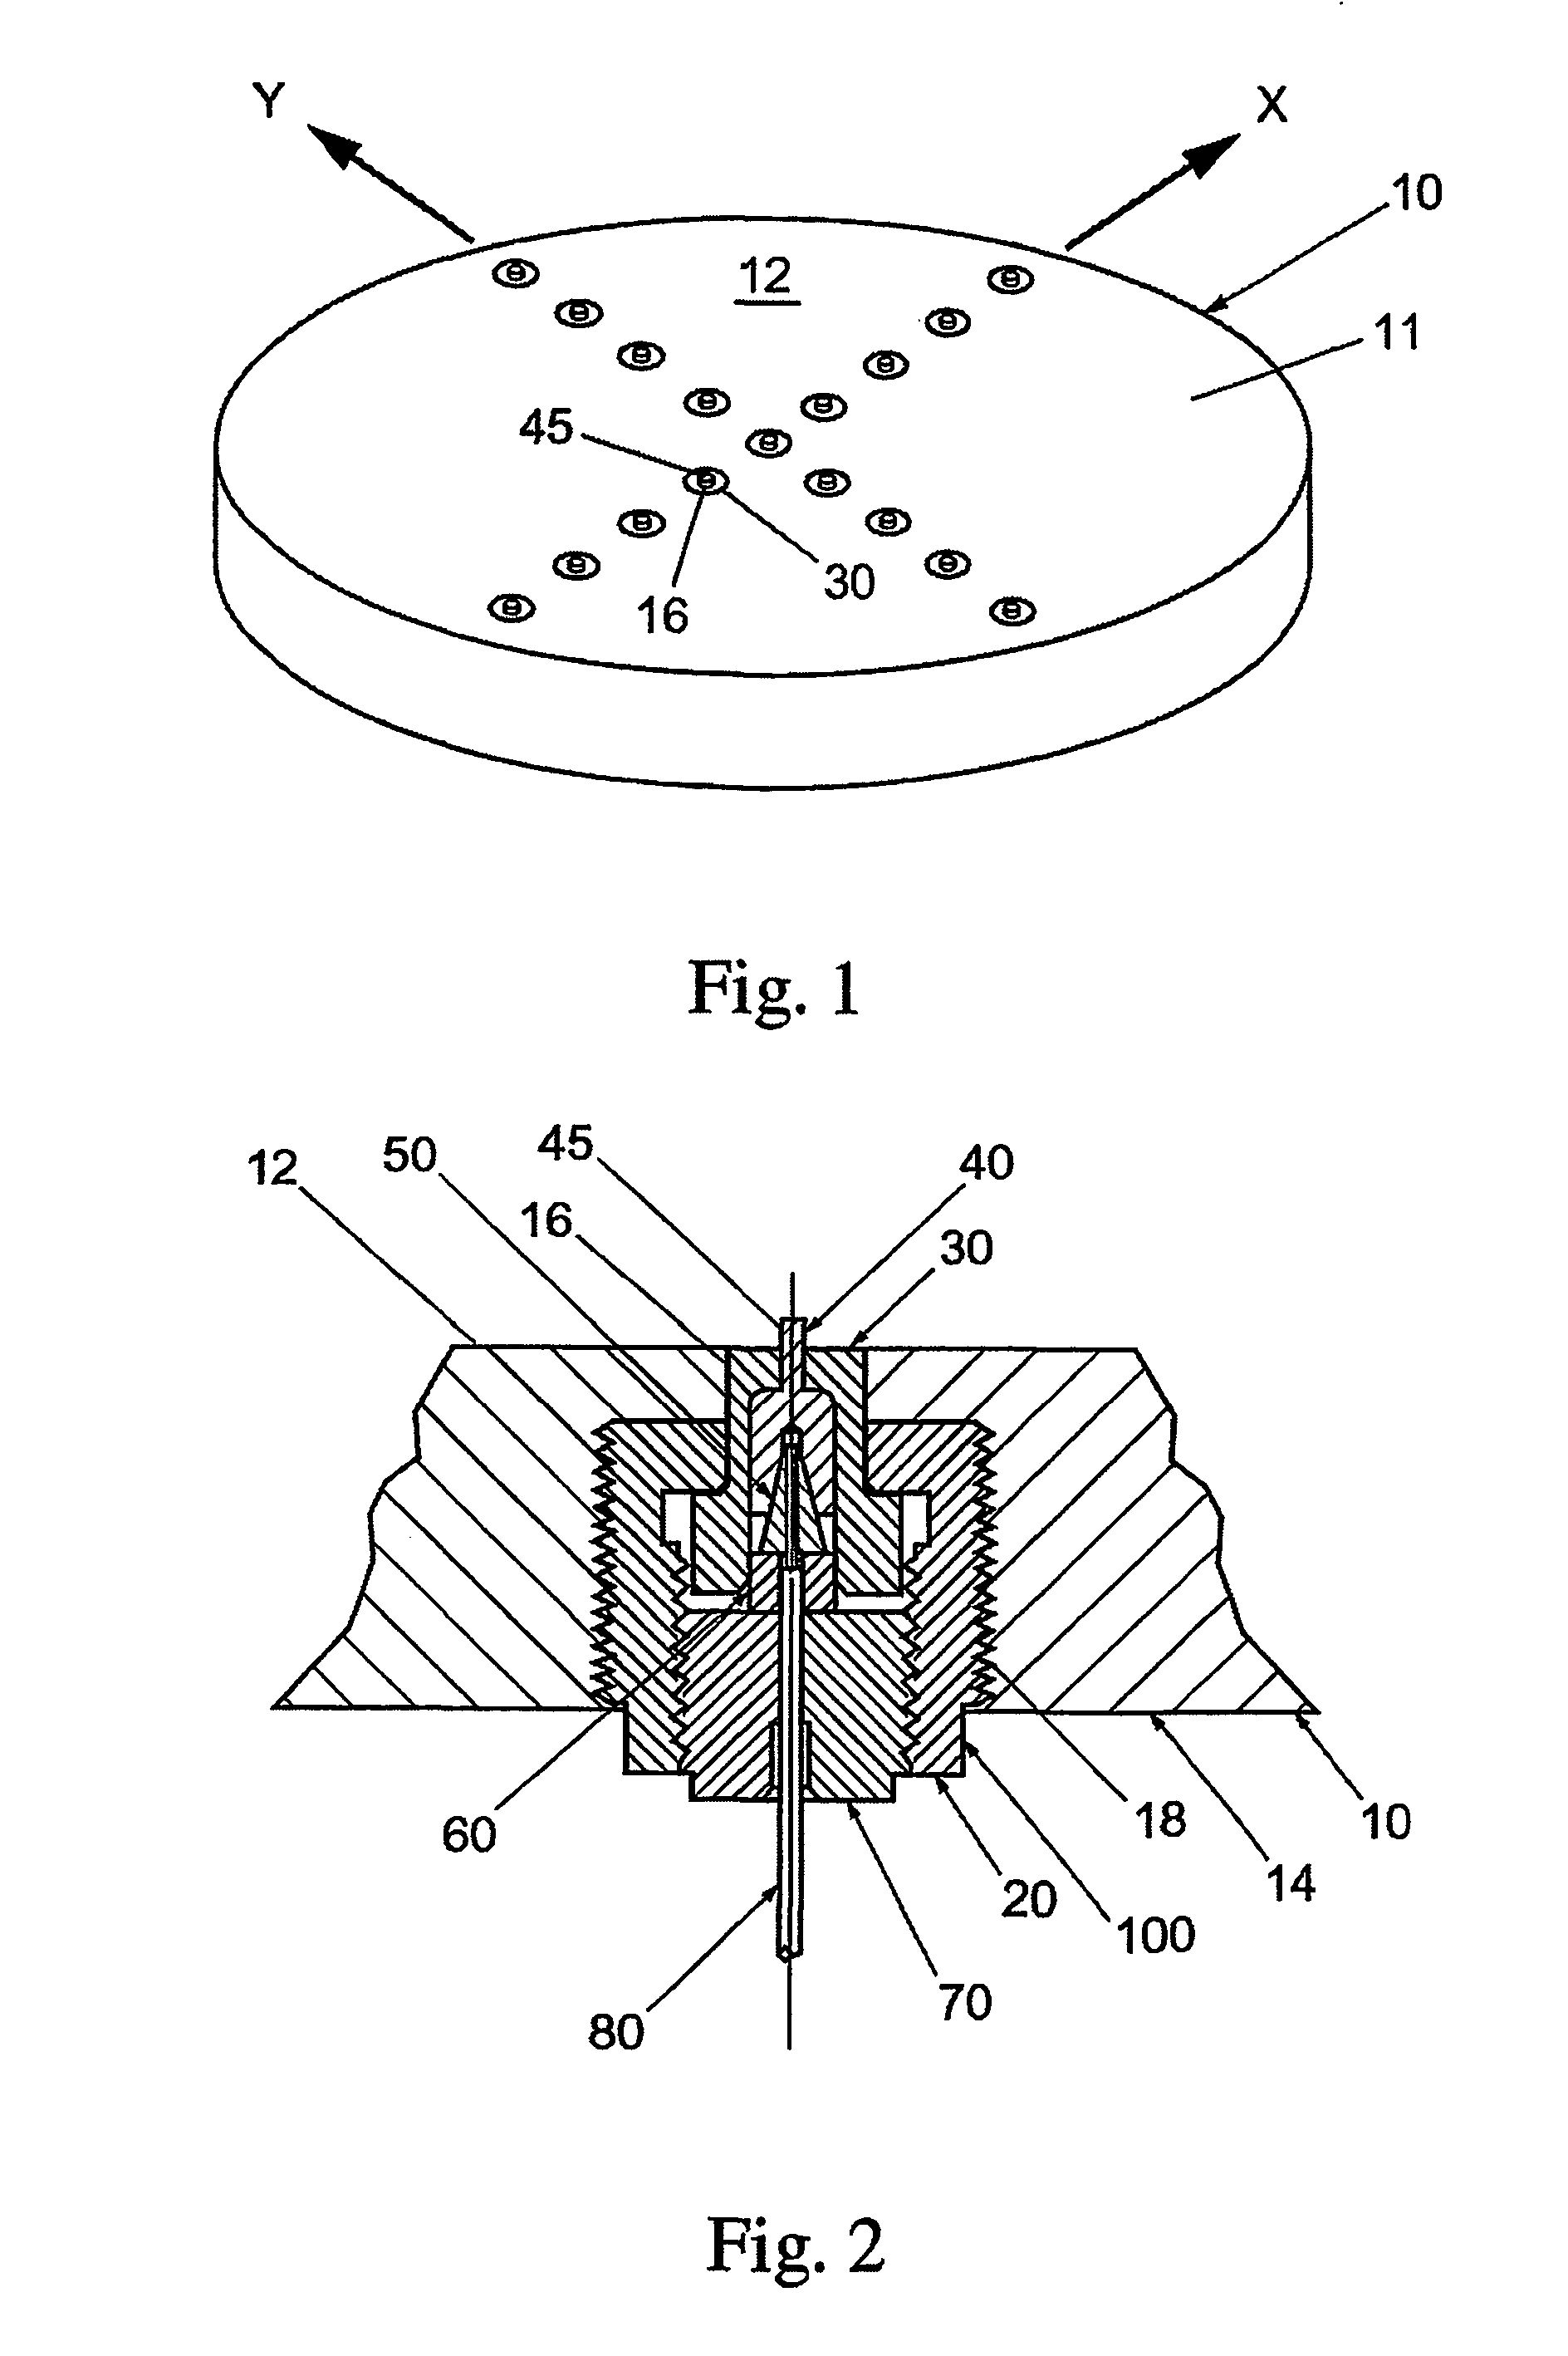 Probe cartridge assembly and multi-probe assembly